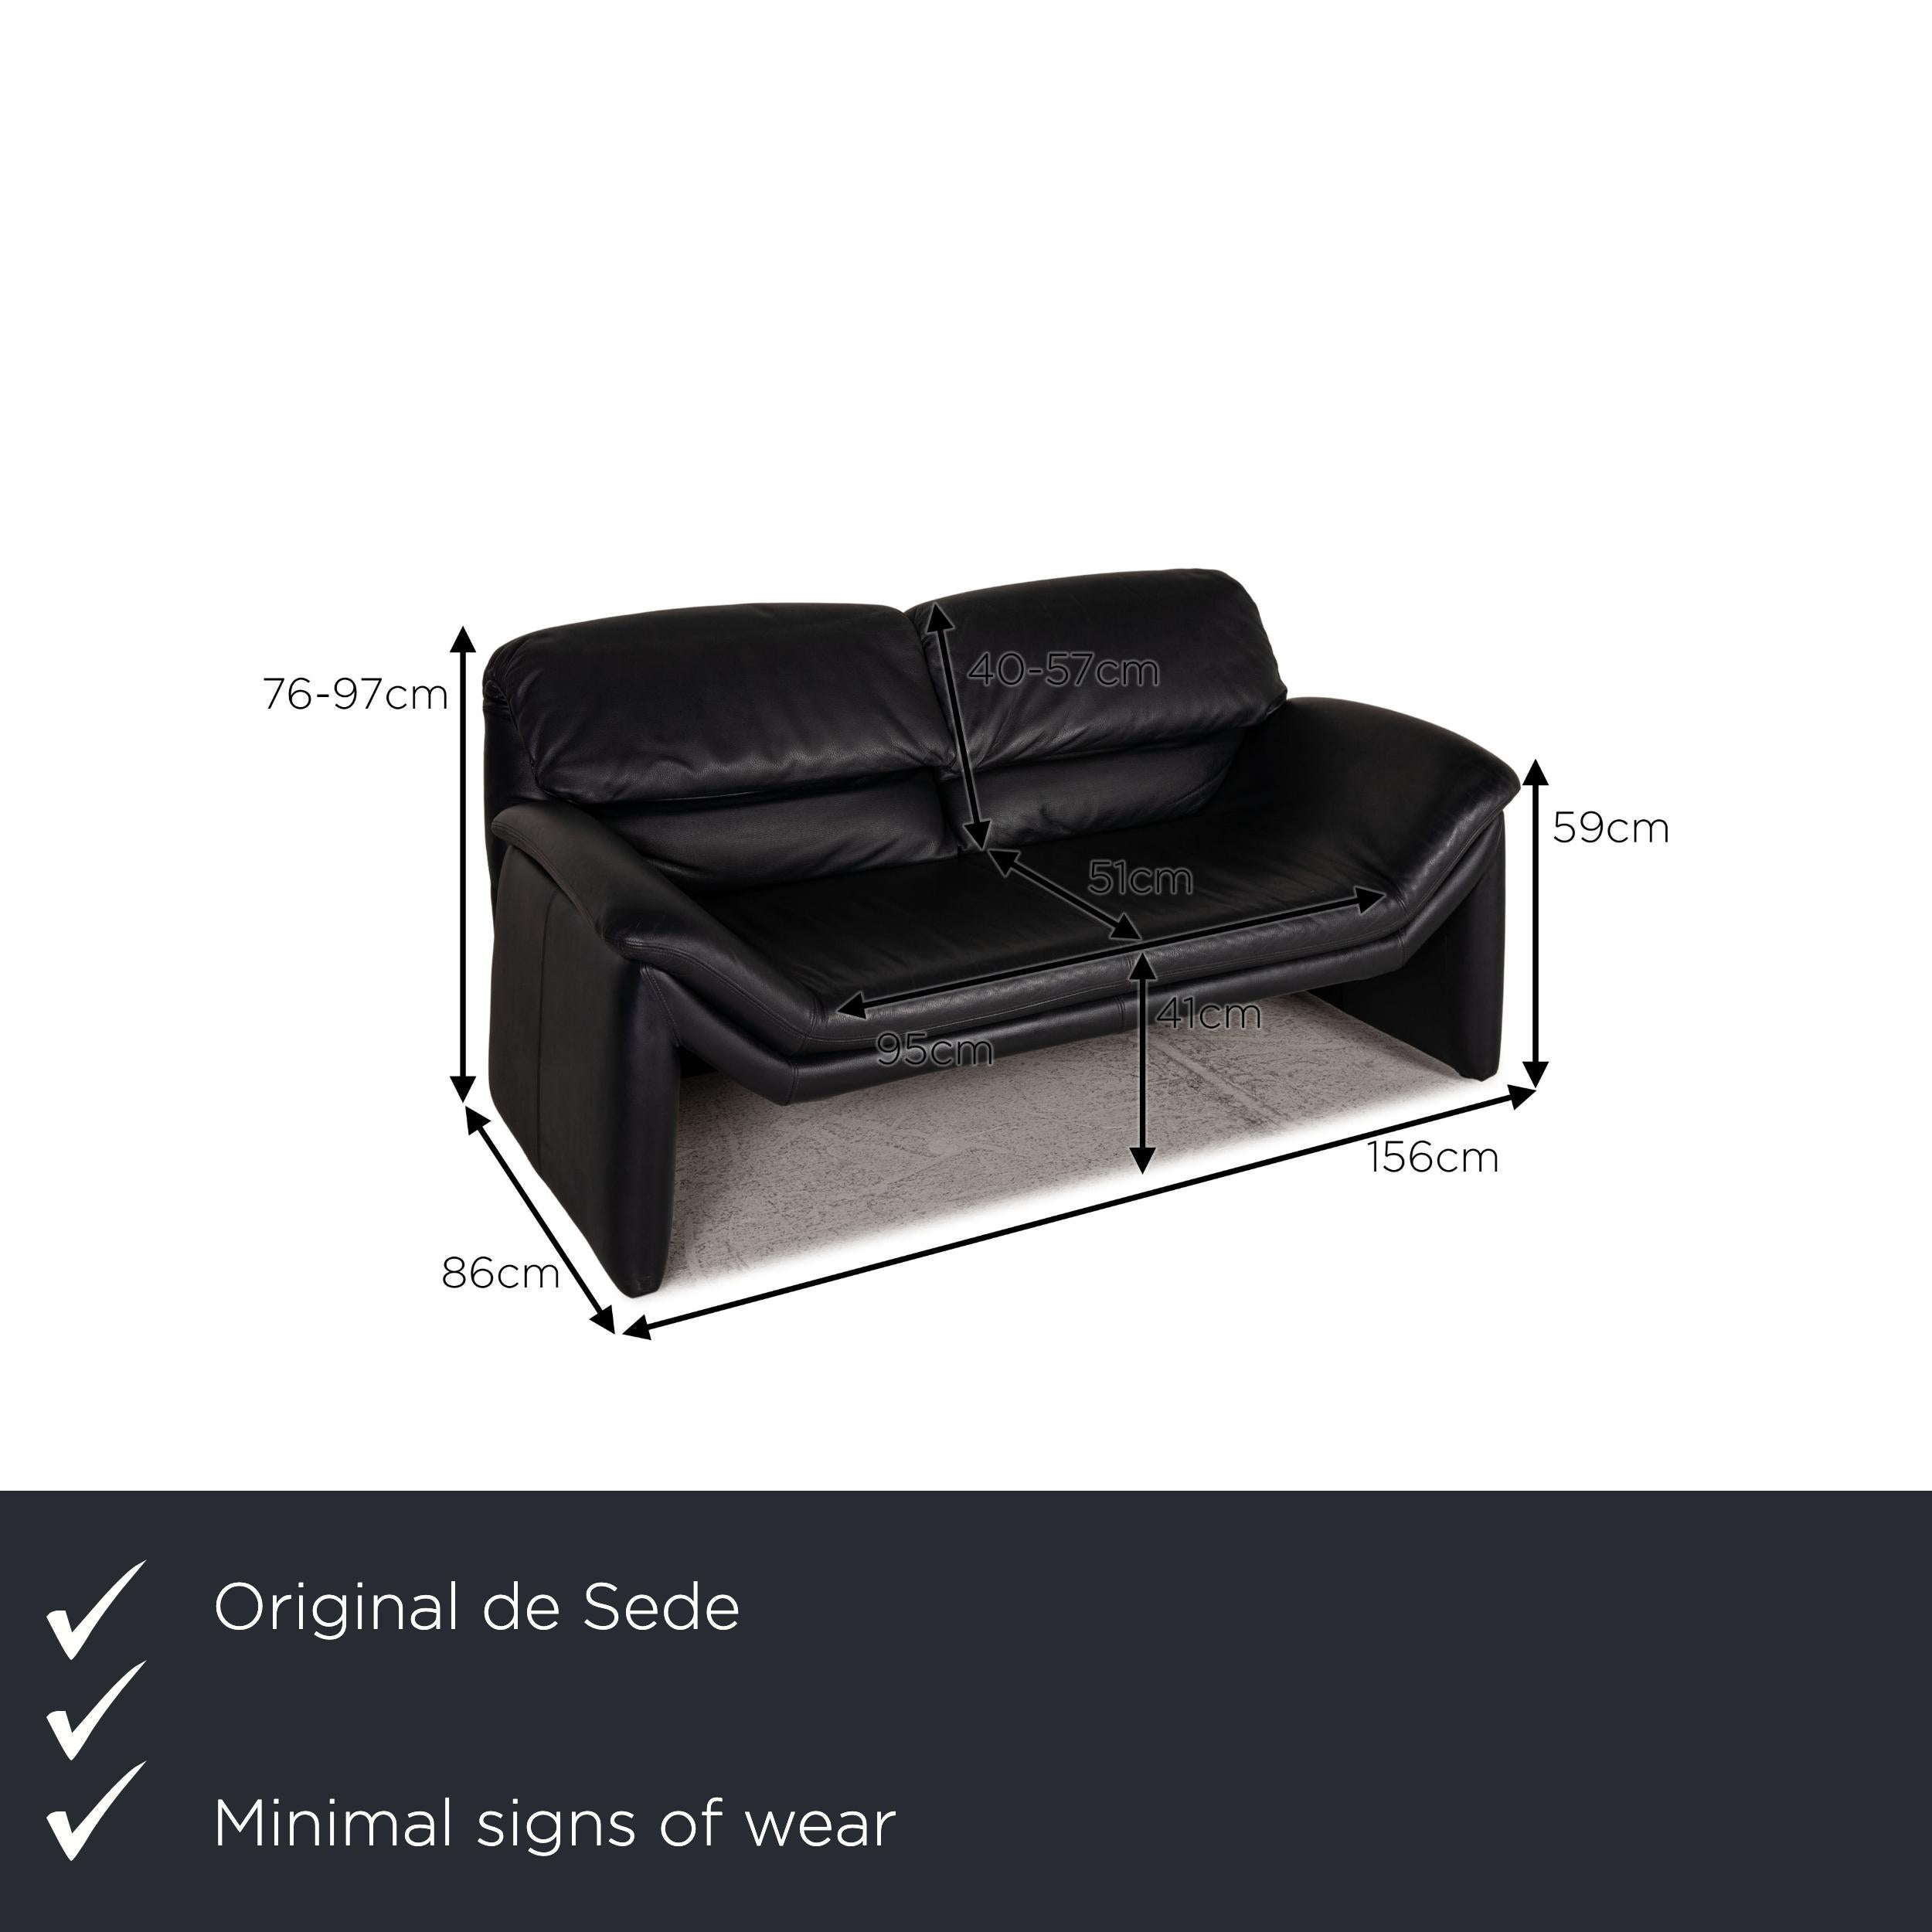 We present to you a De Sede leather sofa blue two-seater couch.

Product measurements in centimeters:

depth: 86
width: 156
height: 76
seat height: 41
rest height: 59
seat depth: 51
seat width: 95
back height: 40.

 